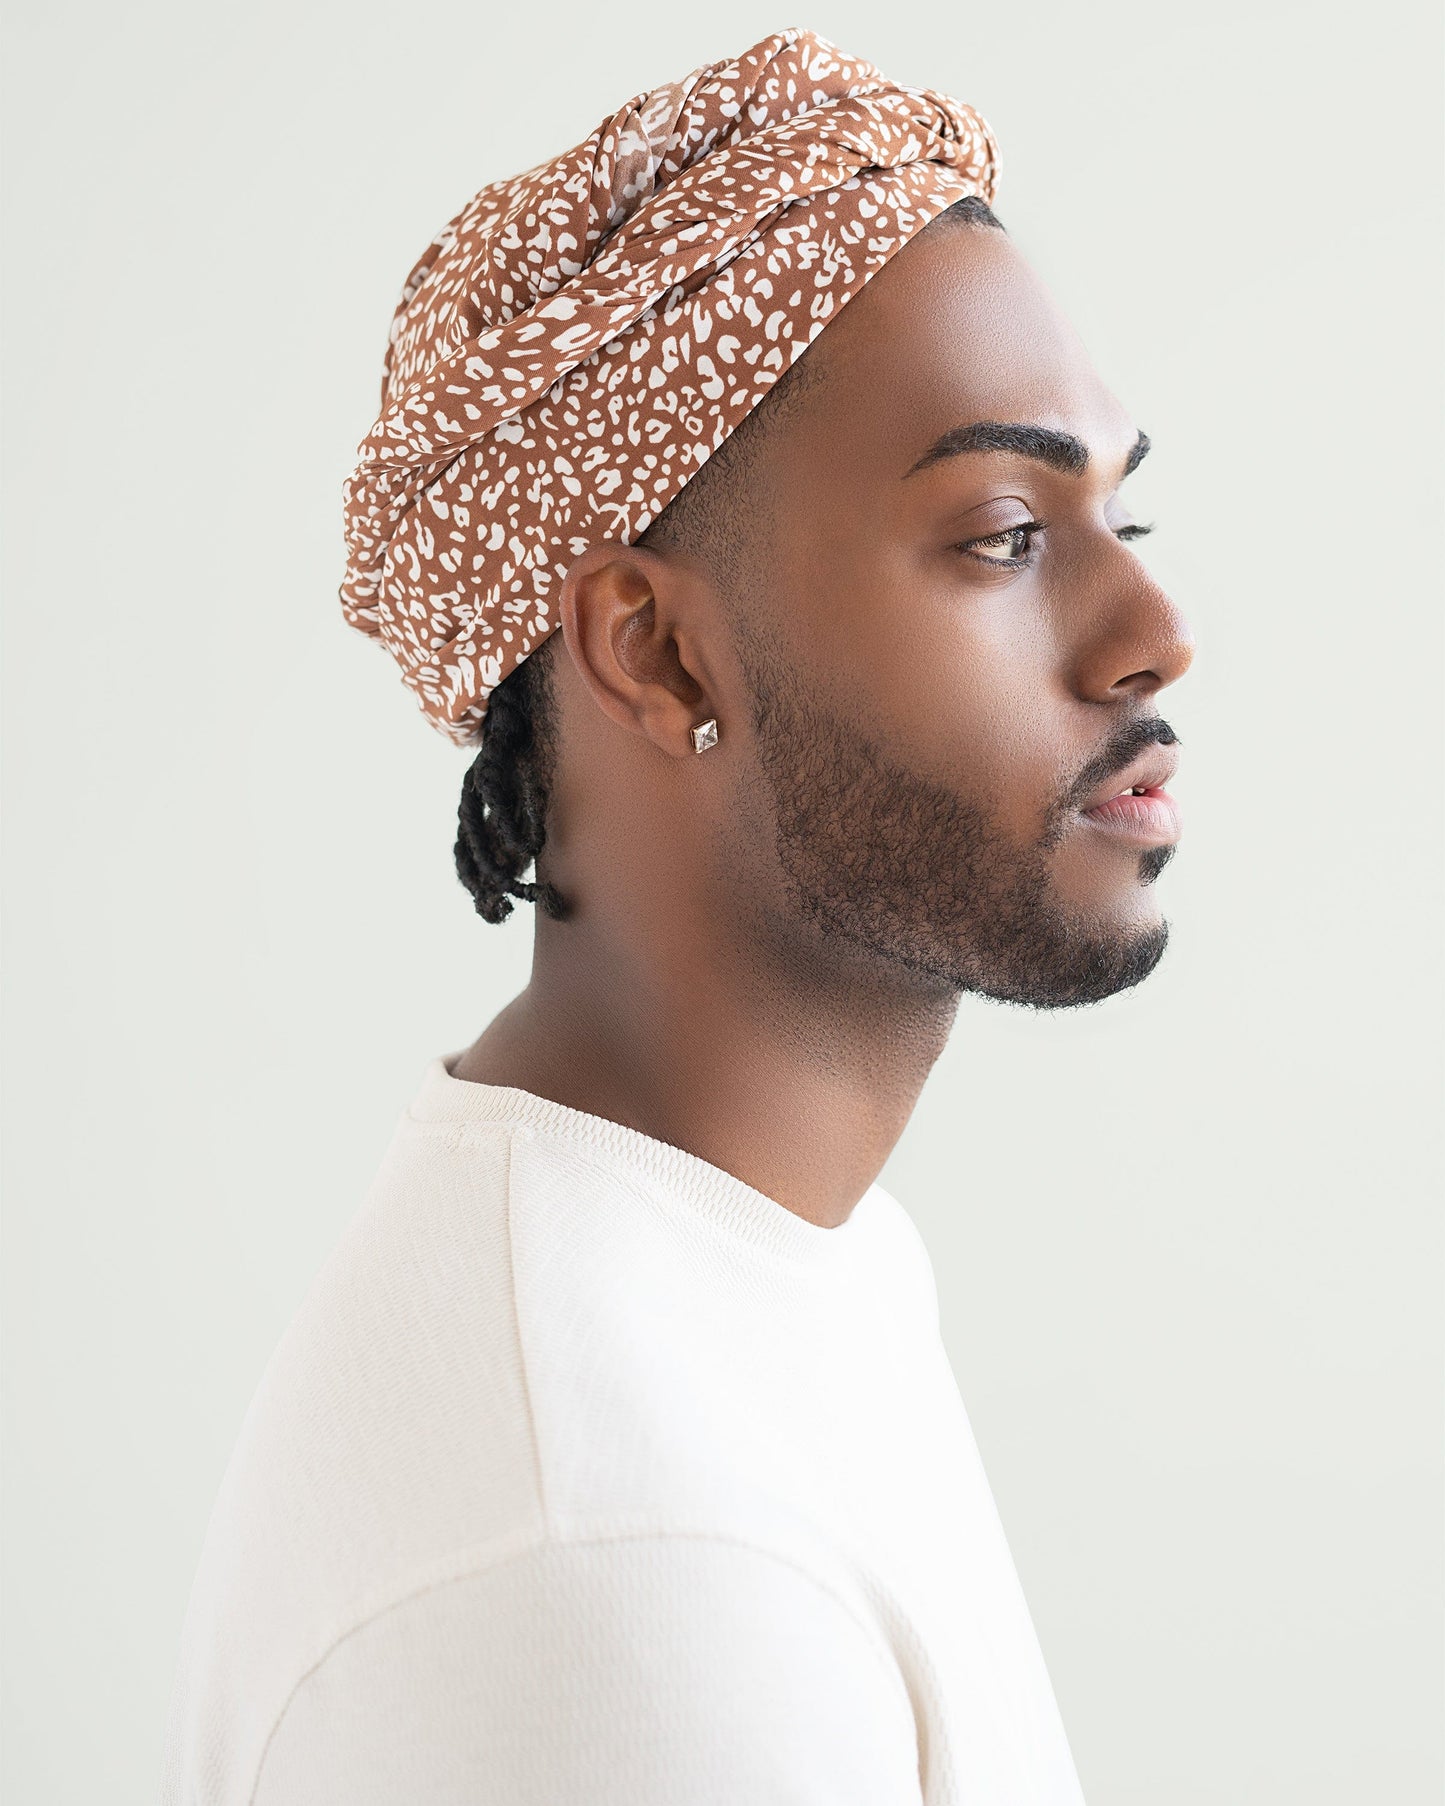 The Wrap Life Whimsical Head Wrap in Toffee Brown Head Wrap